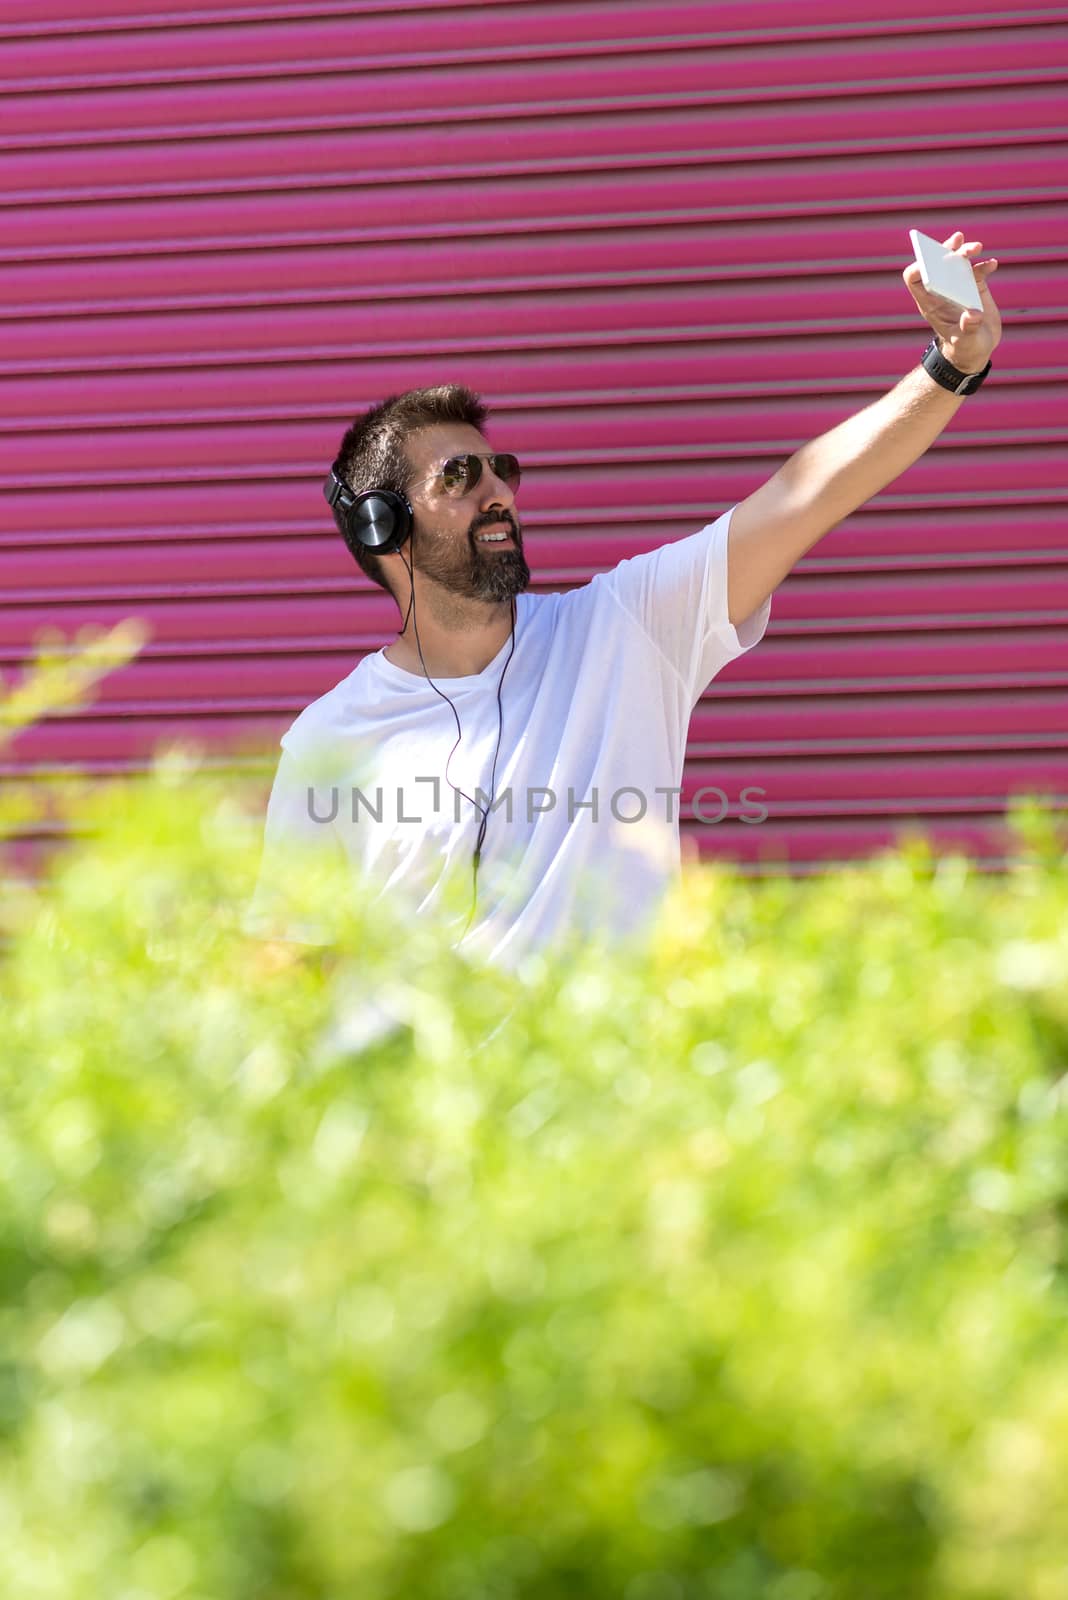 Bearded man with sunglasses taking a selfie against pink wall by raferto1973